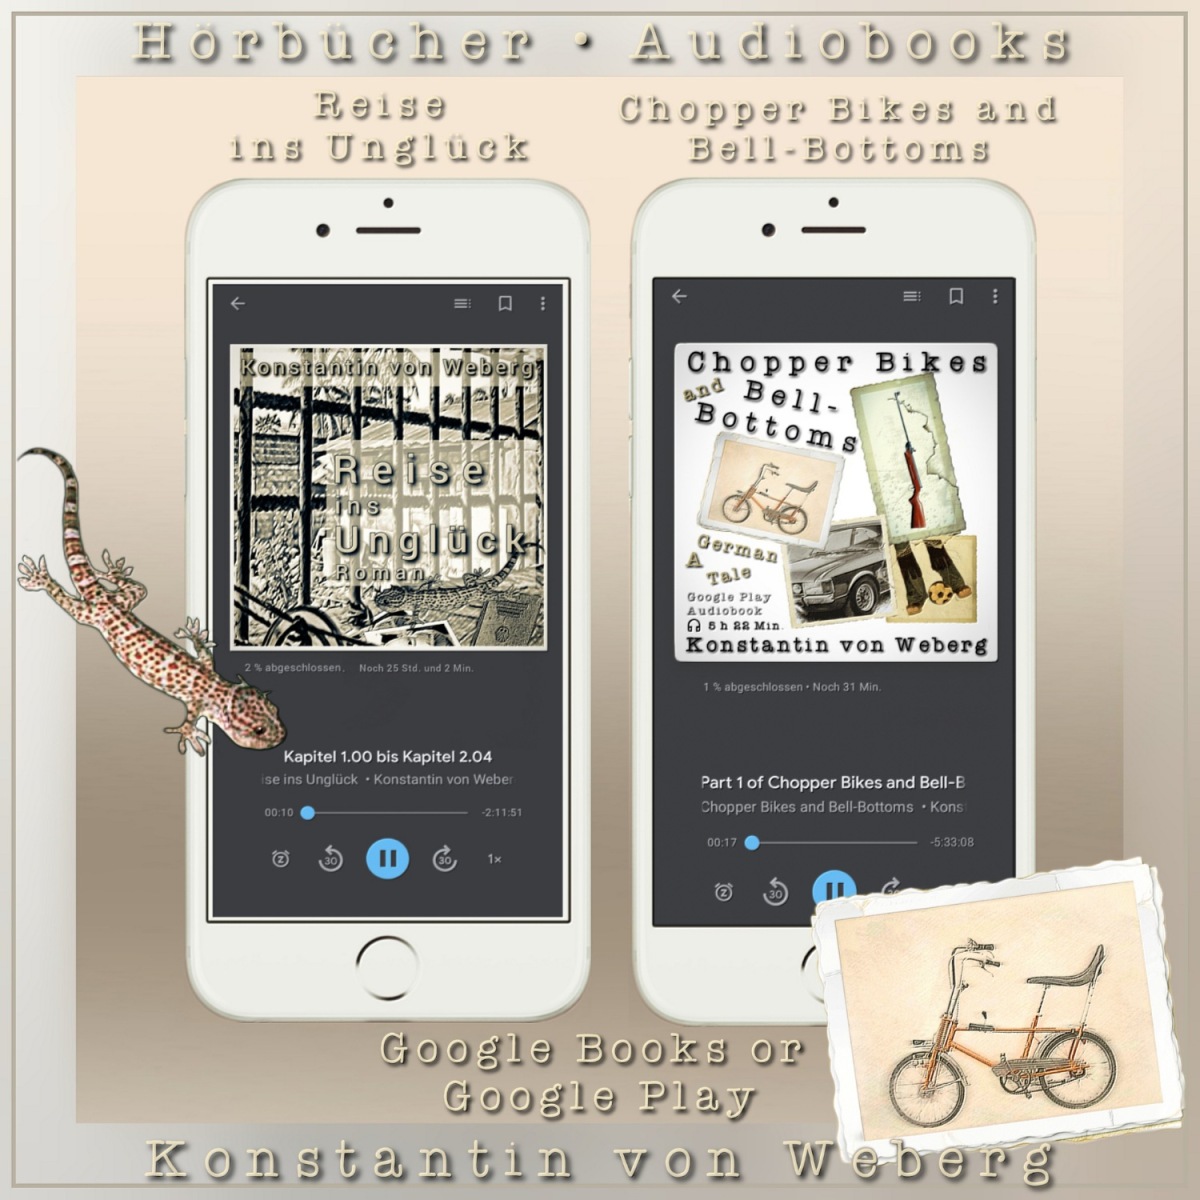 Ebooks and Audiobooks on Google Books, Google Play and Playstore • Not only for Android.